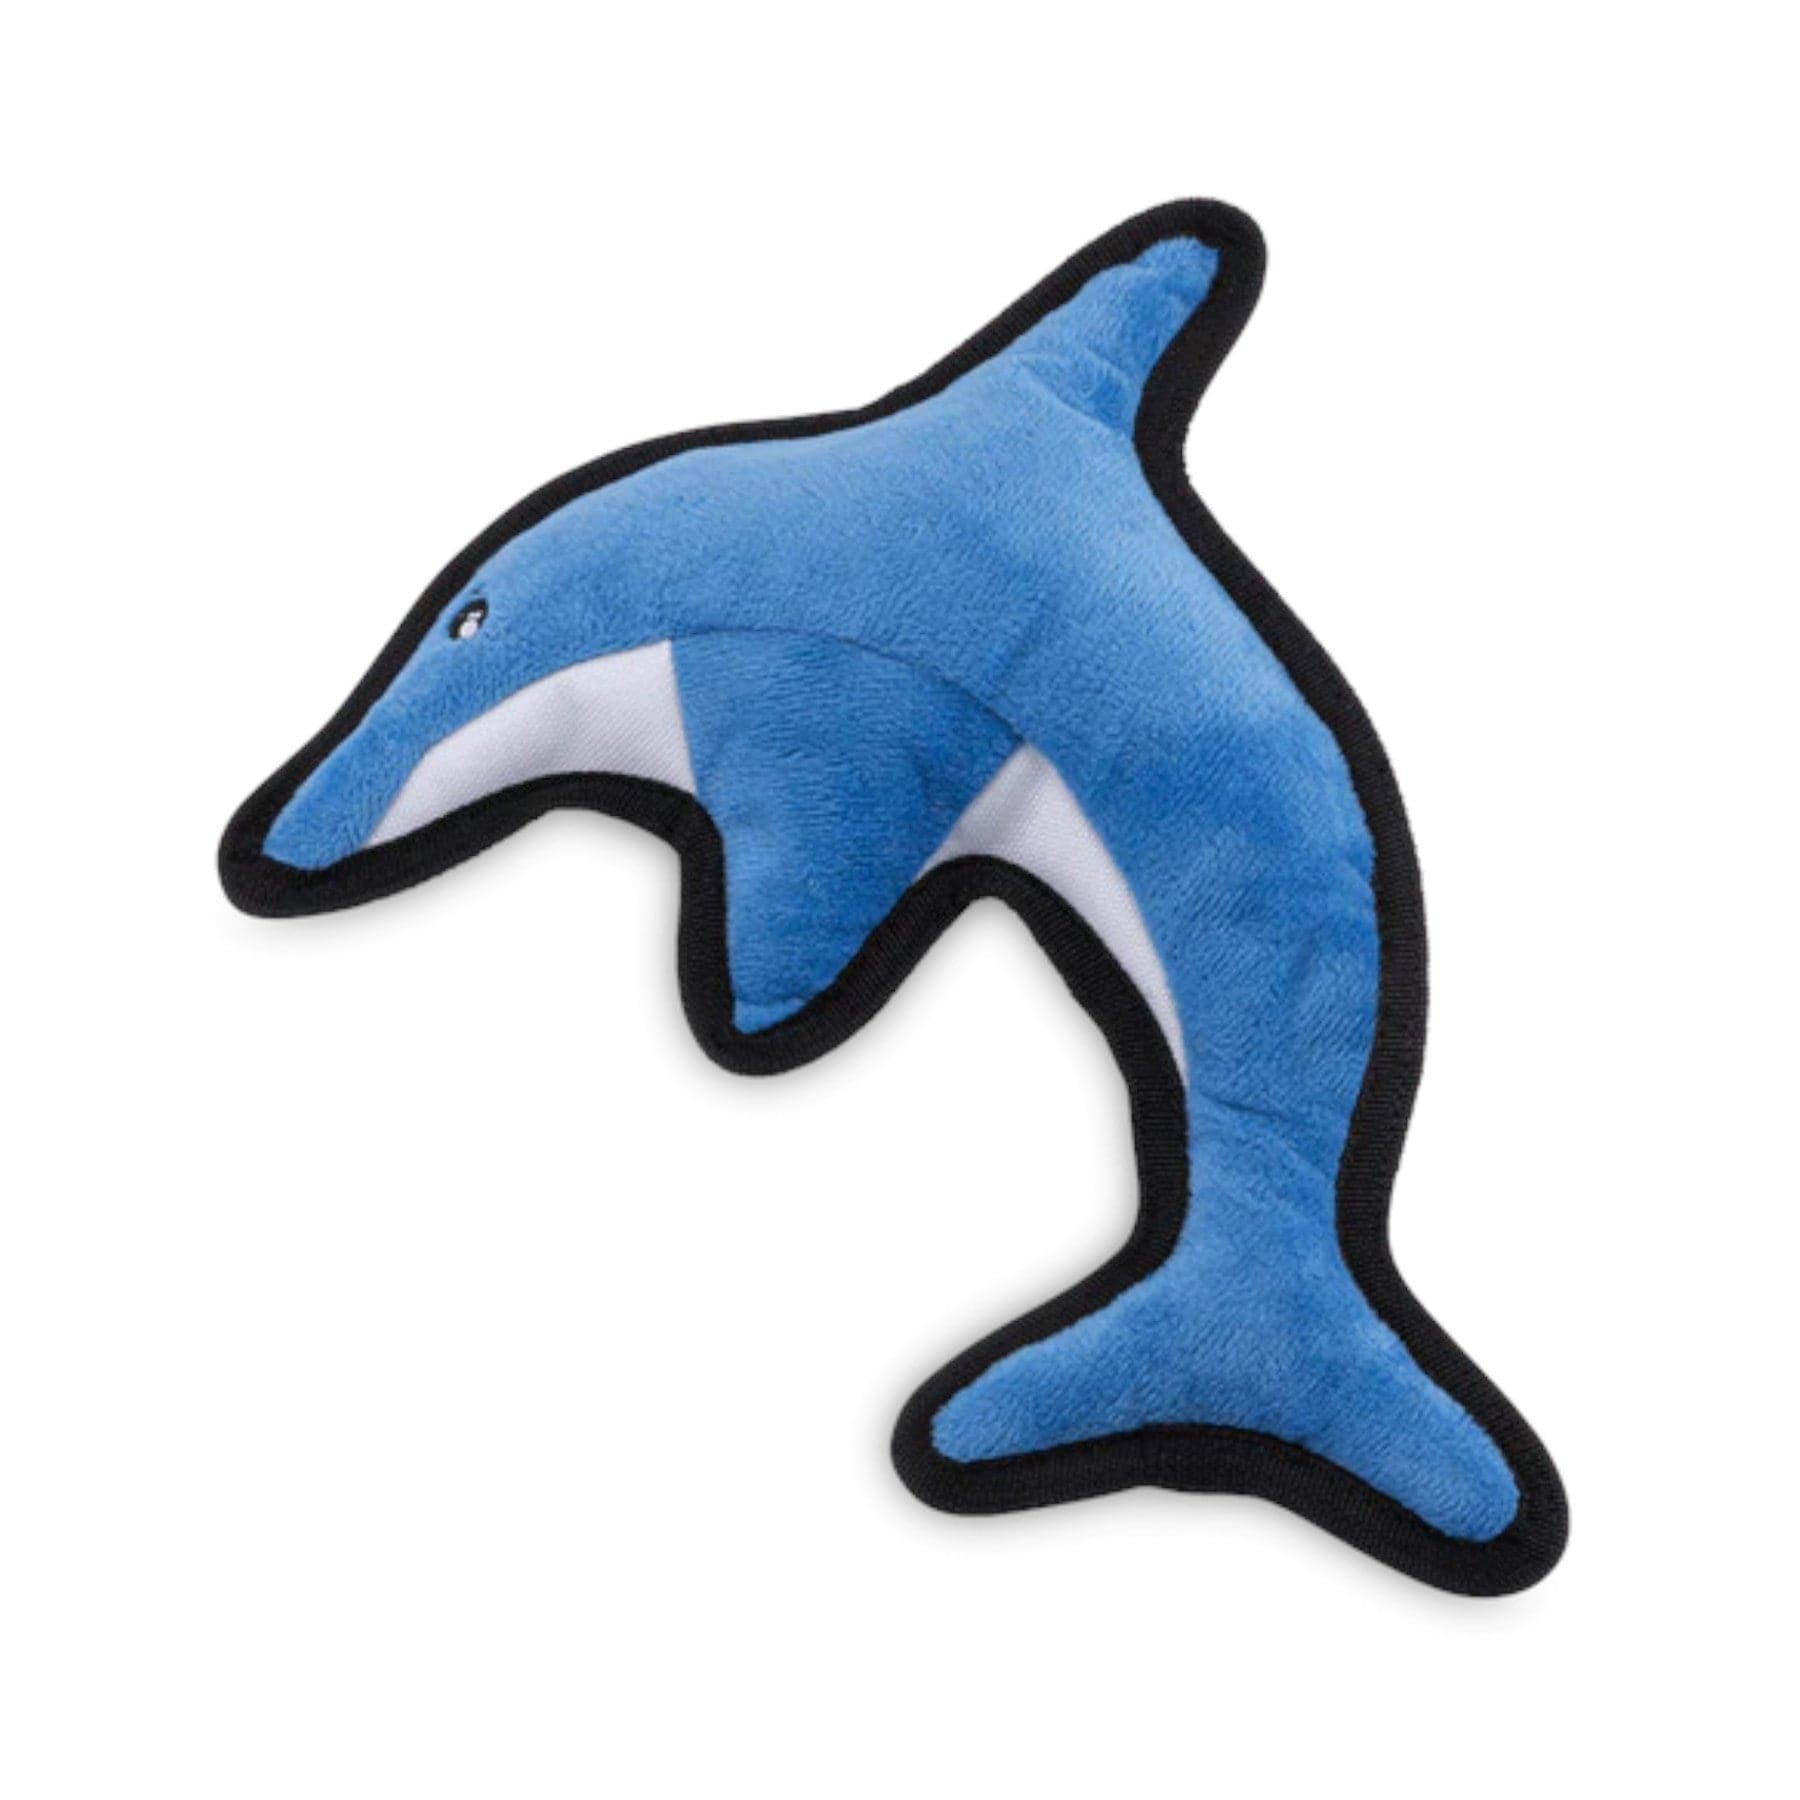 Recycled rough & tough dolphin - large